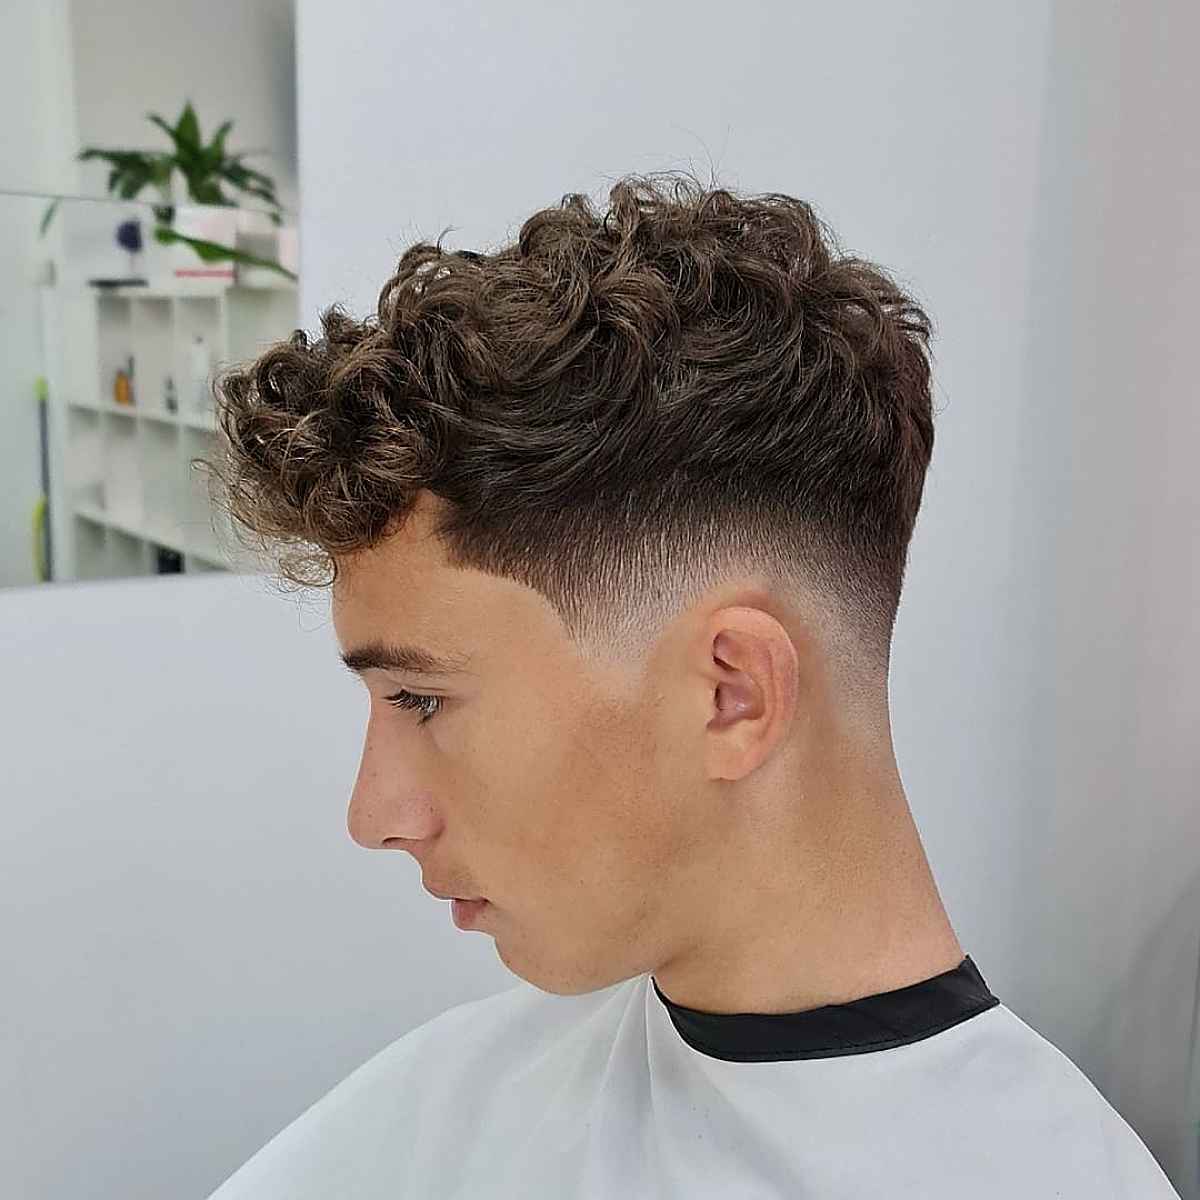 43 Attractive Curly Undercut Haircut Ideas in 2023